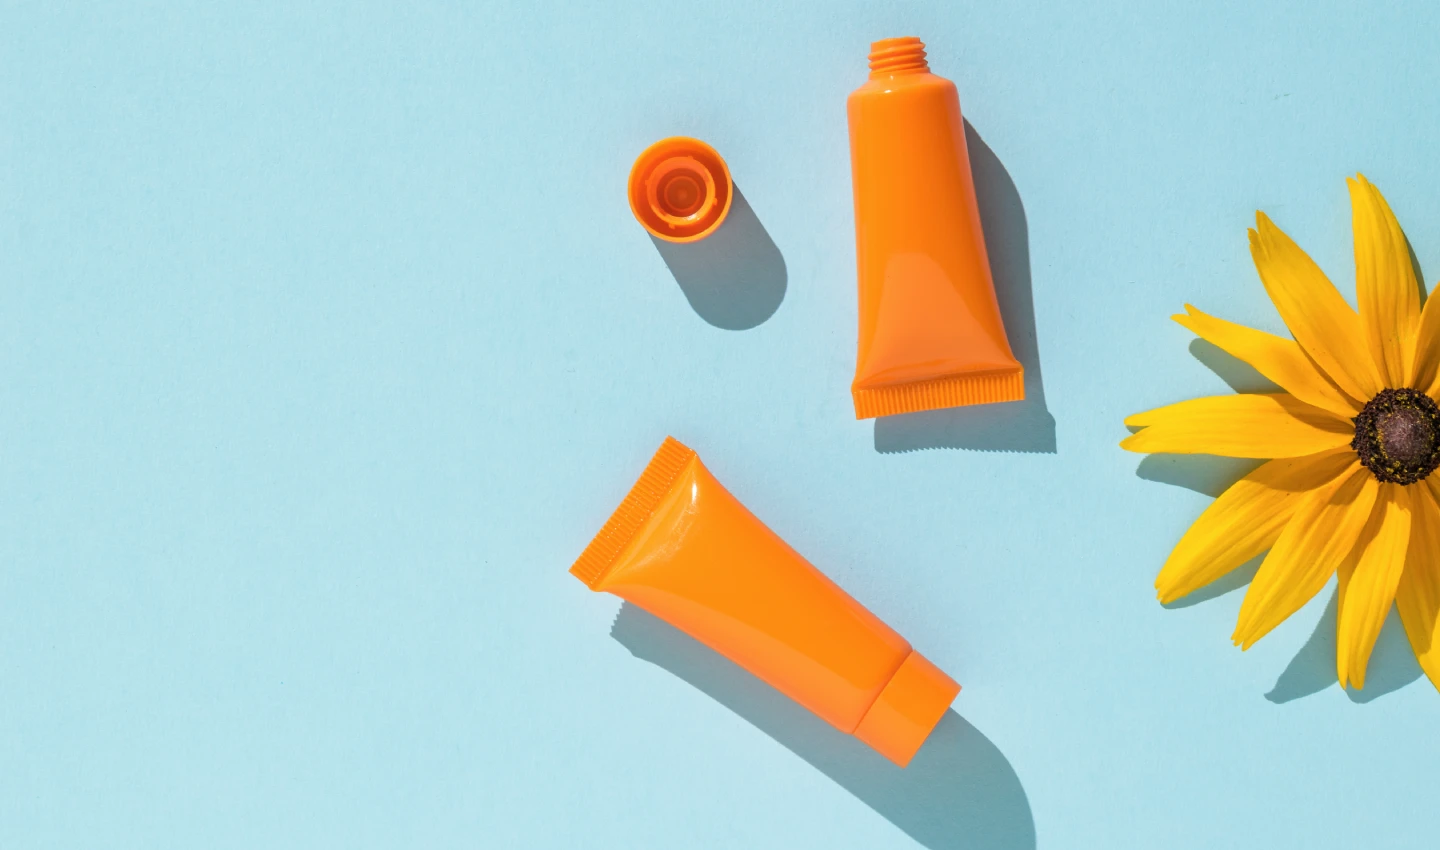 A photo of several sunscreen sticks in different colors and packaging, emphasizing their convenience and portability for on-the-go sun protection.